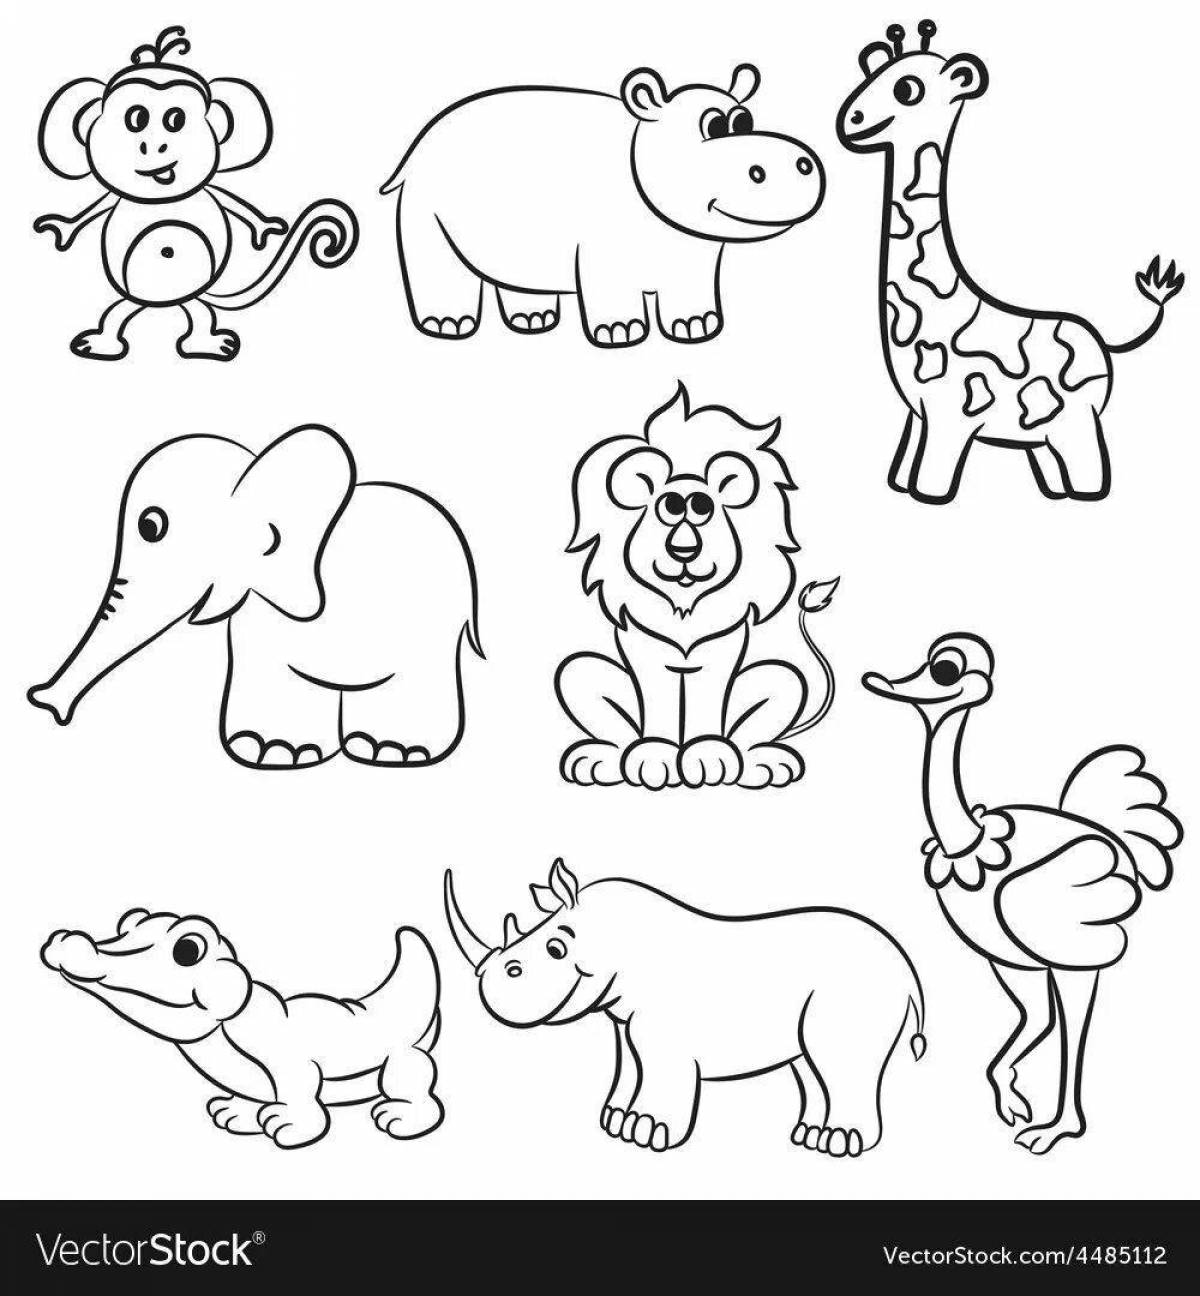 Outstanding african animal coloring page for 5-7 year olds